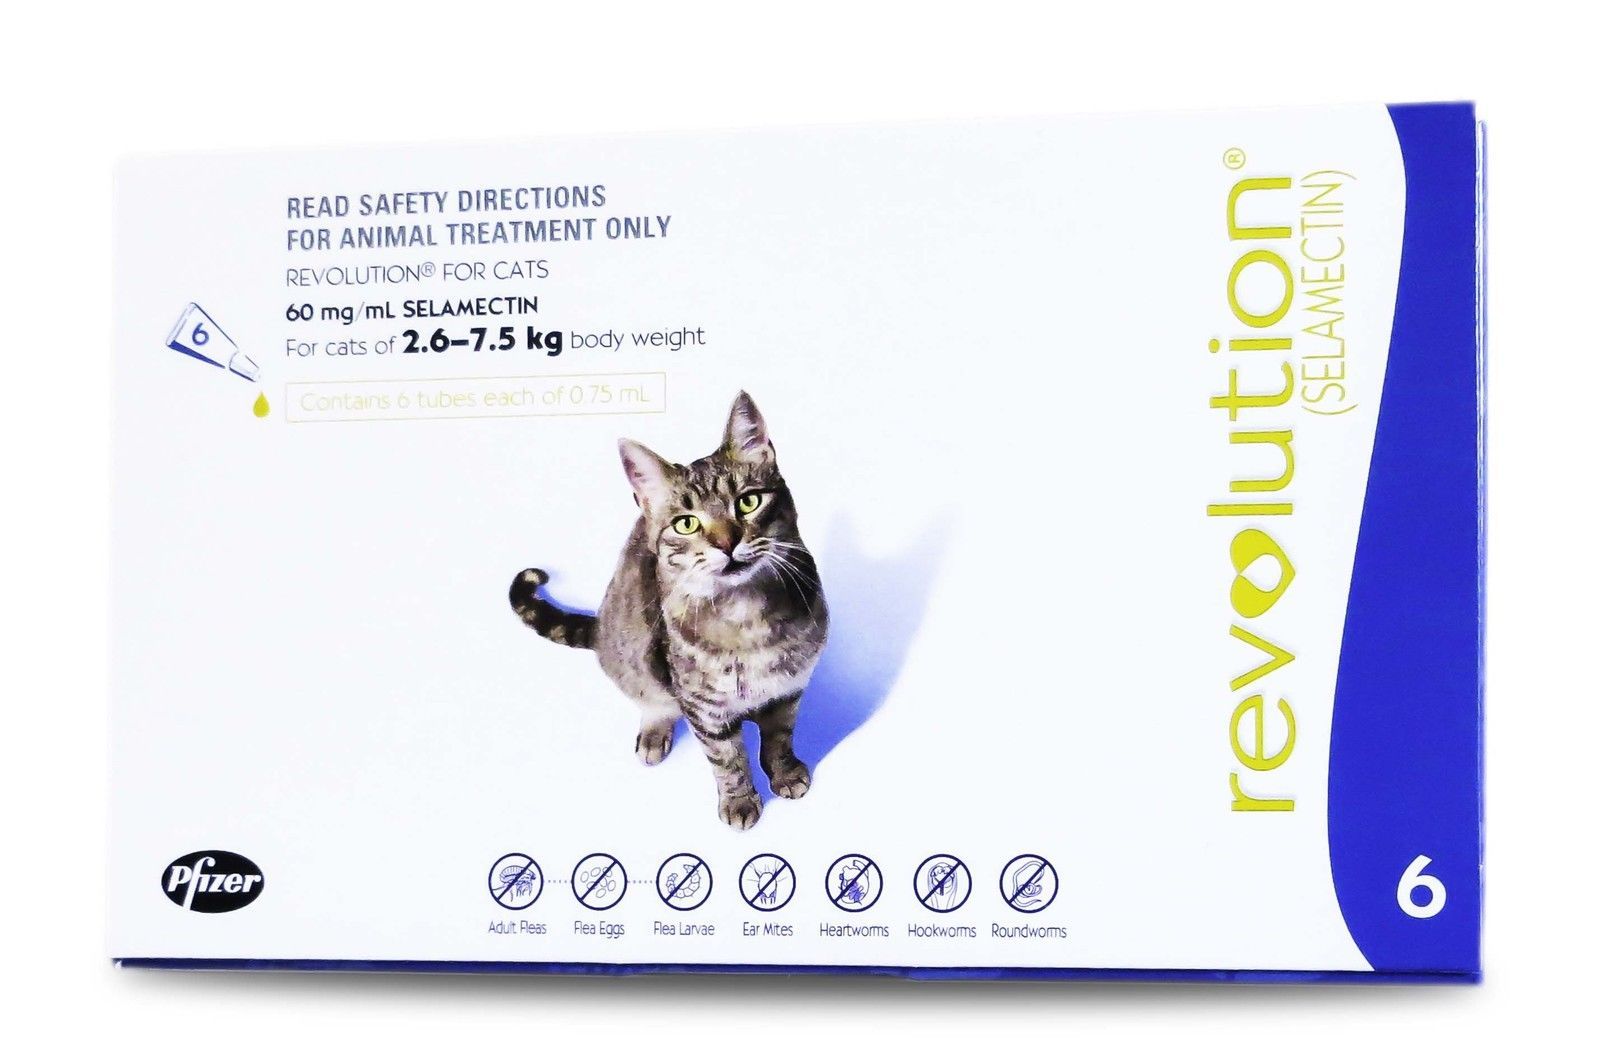 pet-care-tips-complete-overview-of-revolution-for-cats